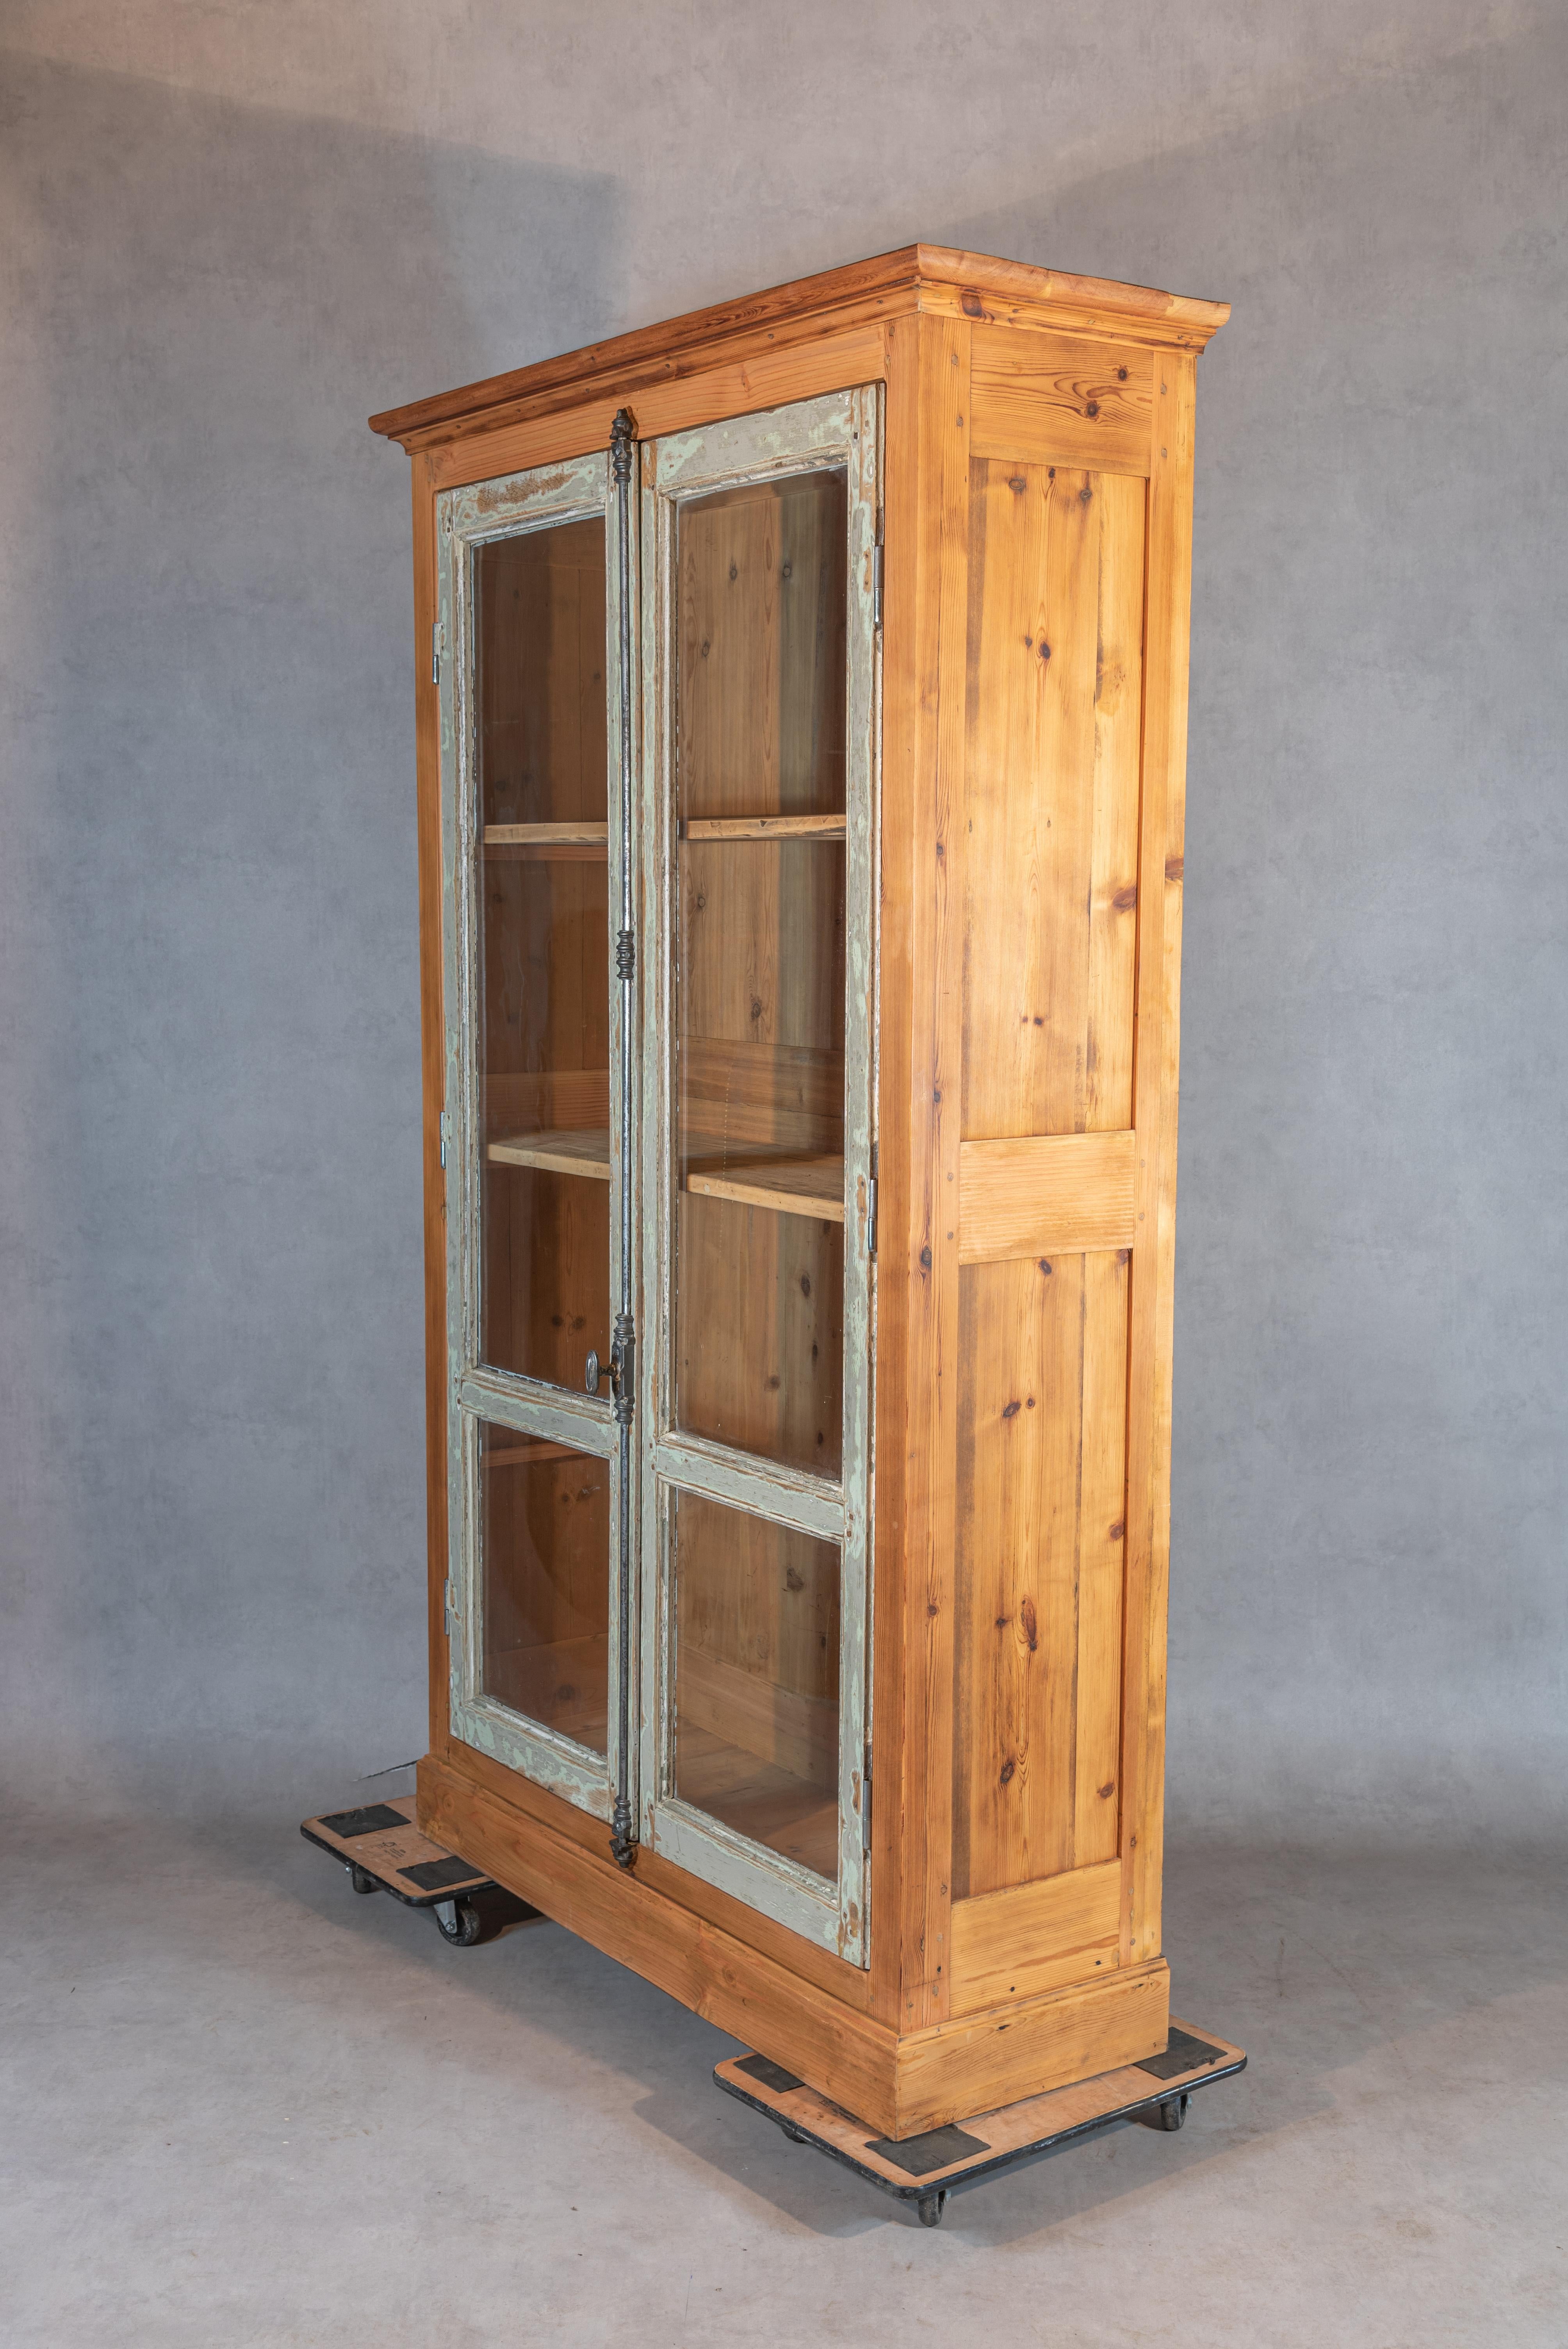 This armoire is one part of our rethought antique lineup. In this case, we took authentic 19th-century windows serving as the main doors. These windows came from a 